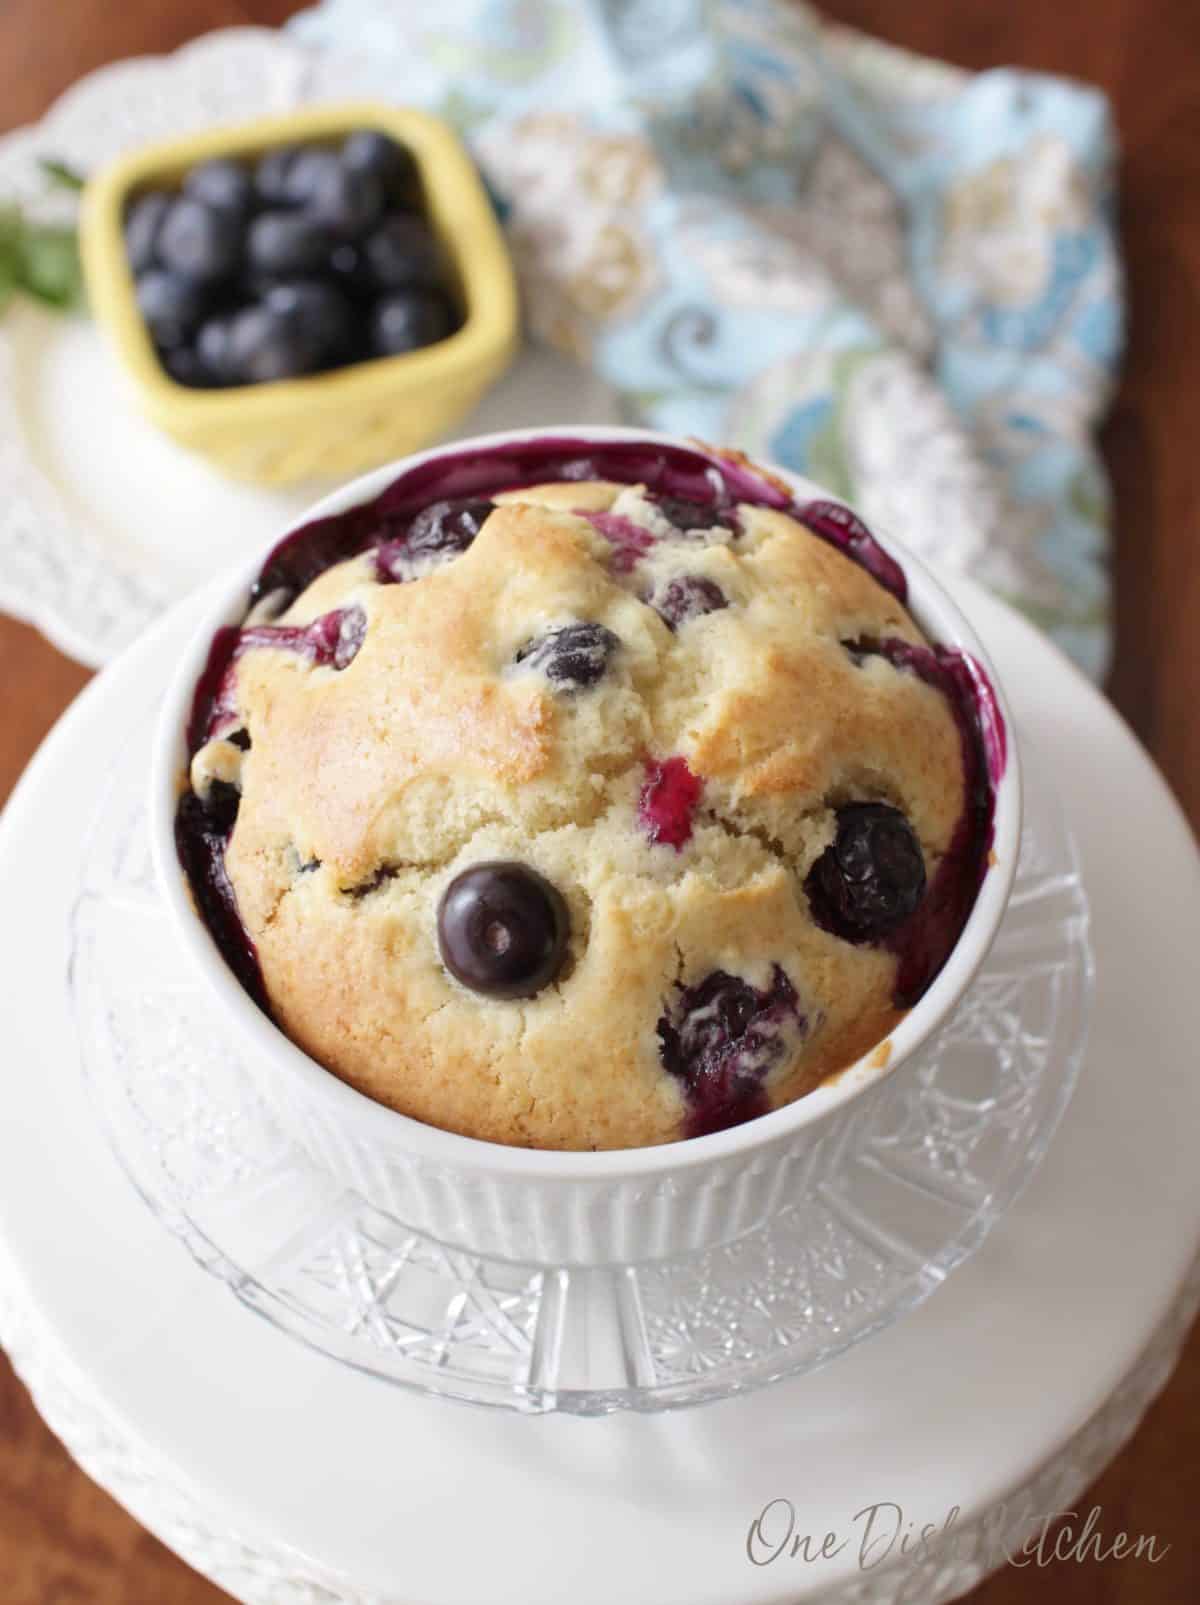 An overhead view of a blueberry muffin in a ramekin plated next to a small bowl of blueberries.